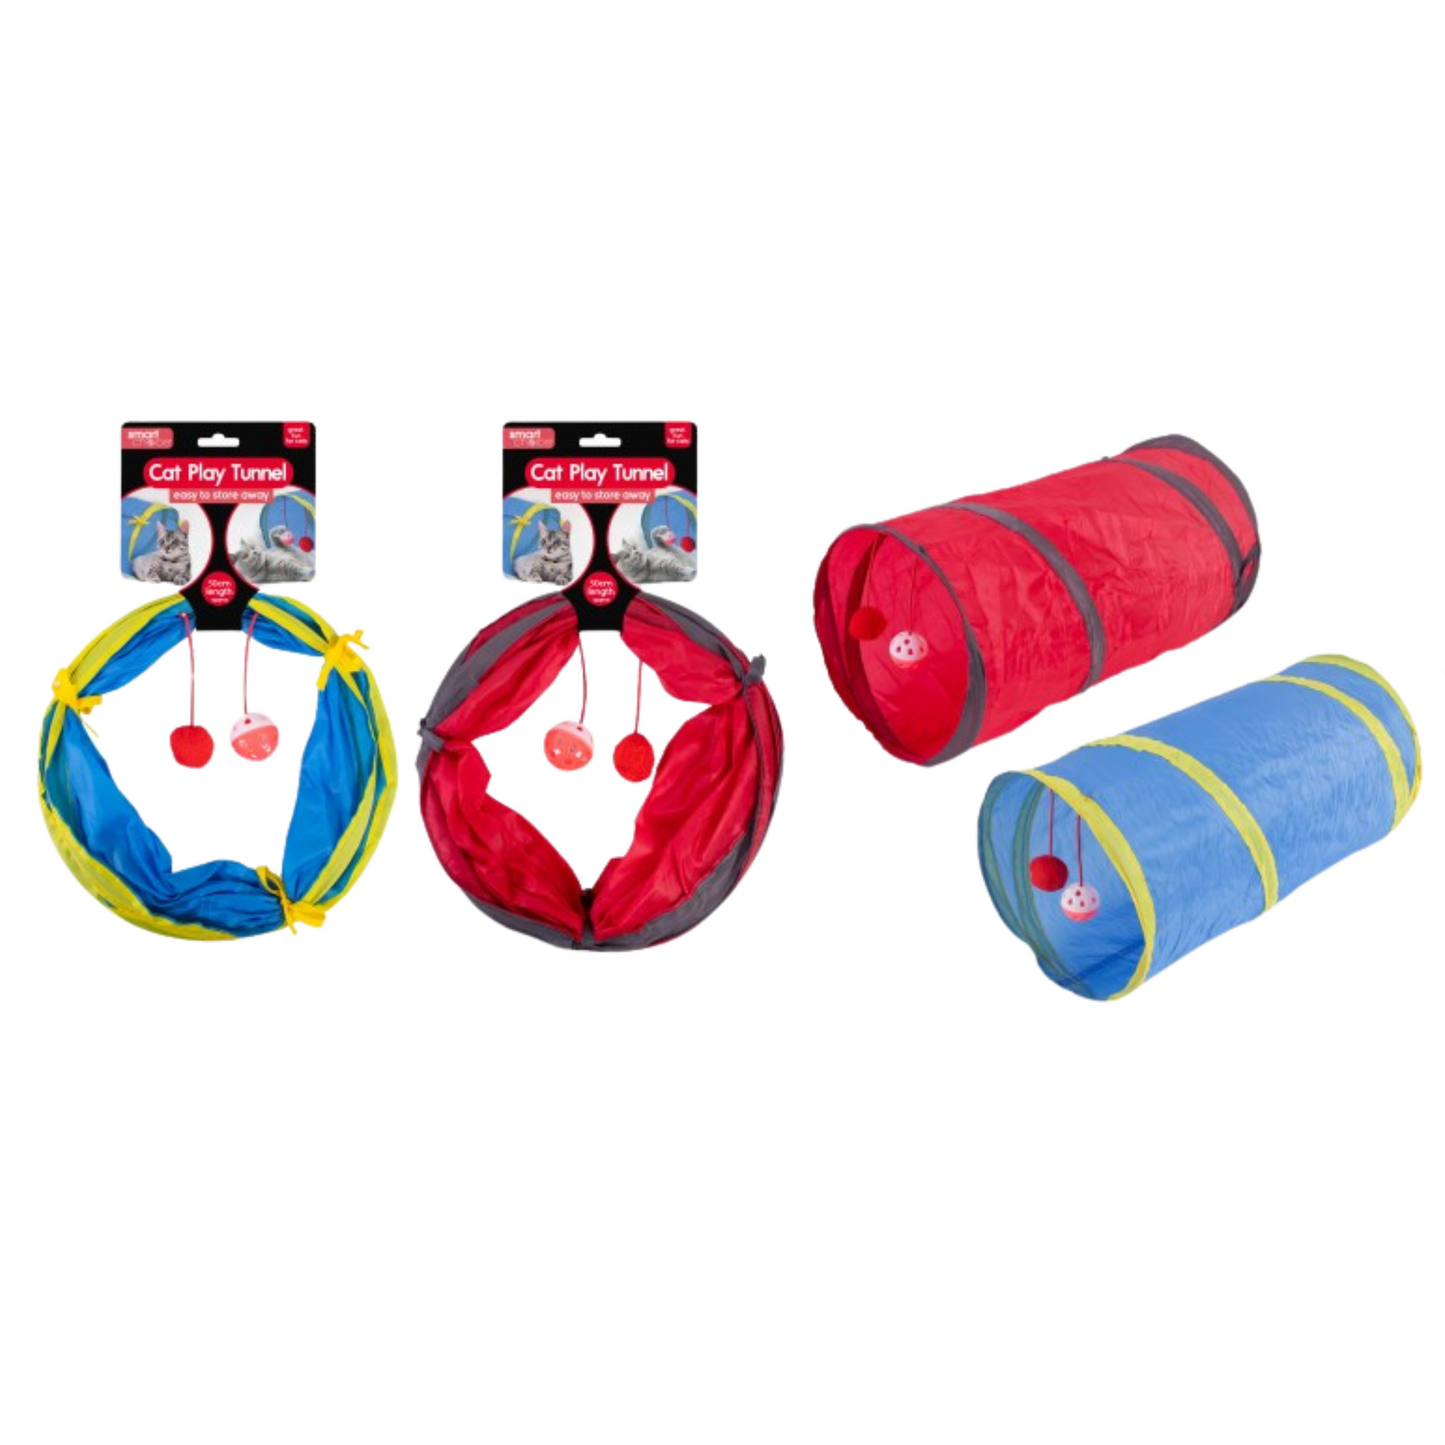 Smart Choice Cat Play Tunnel with Interactive Ball Toys